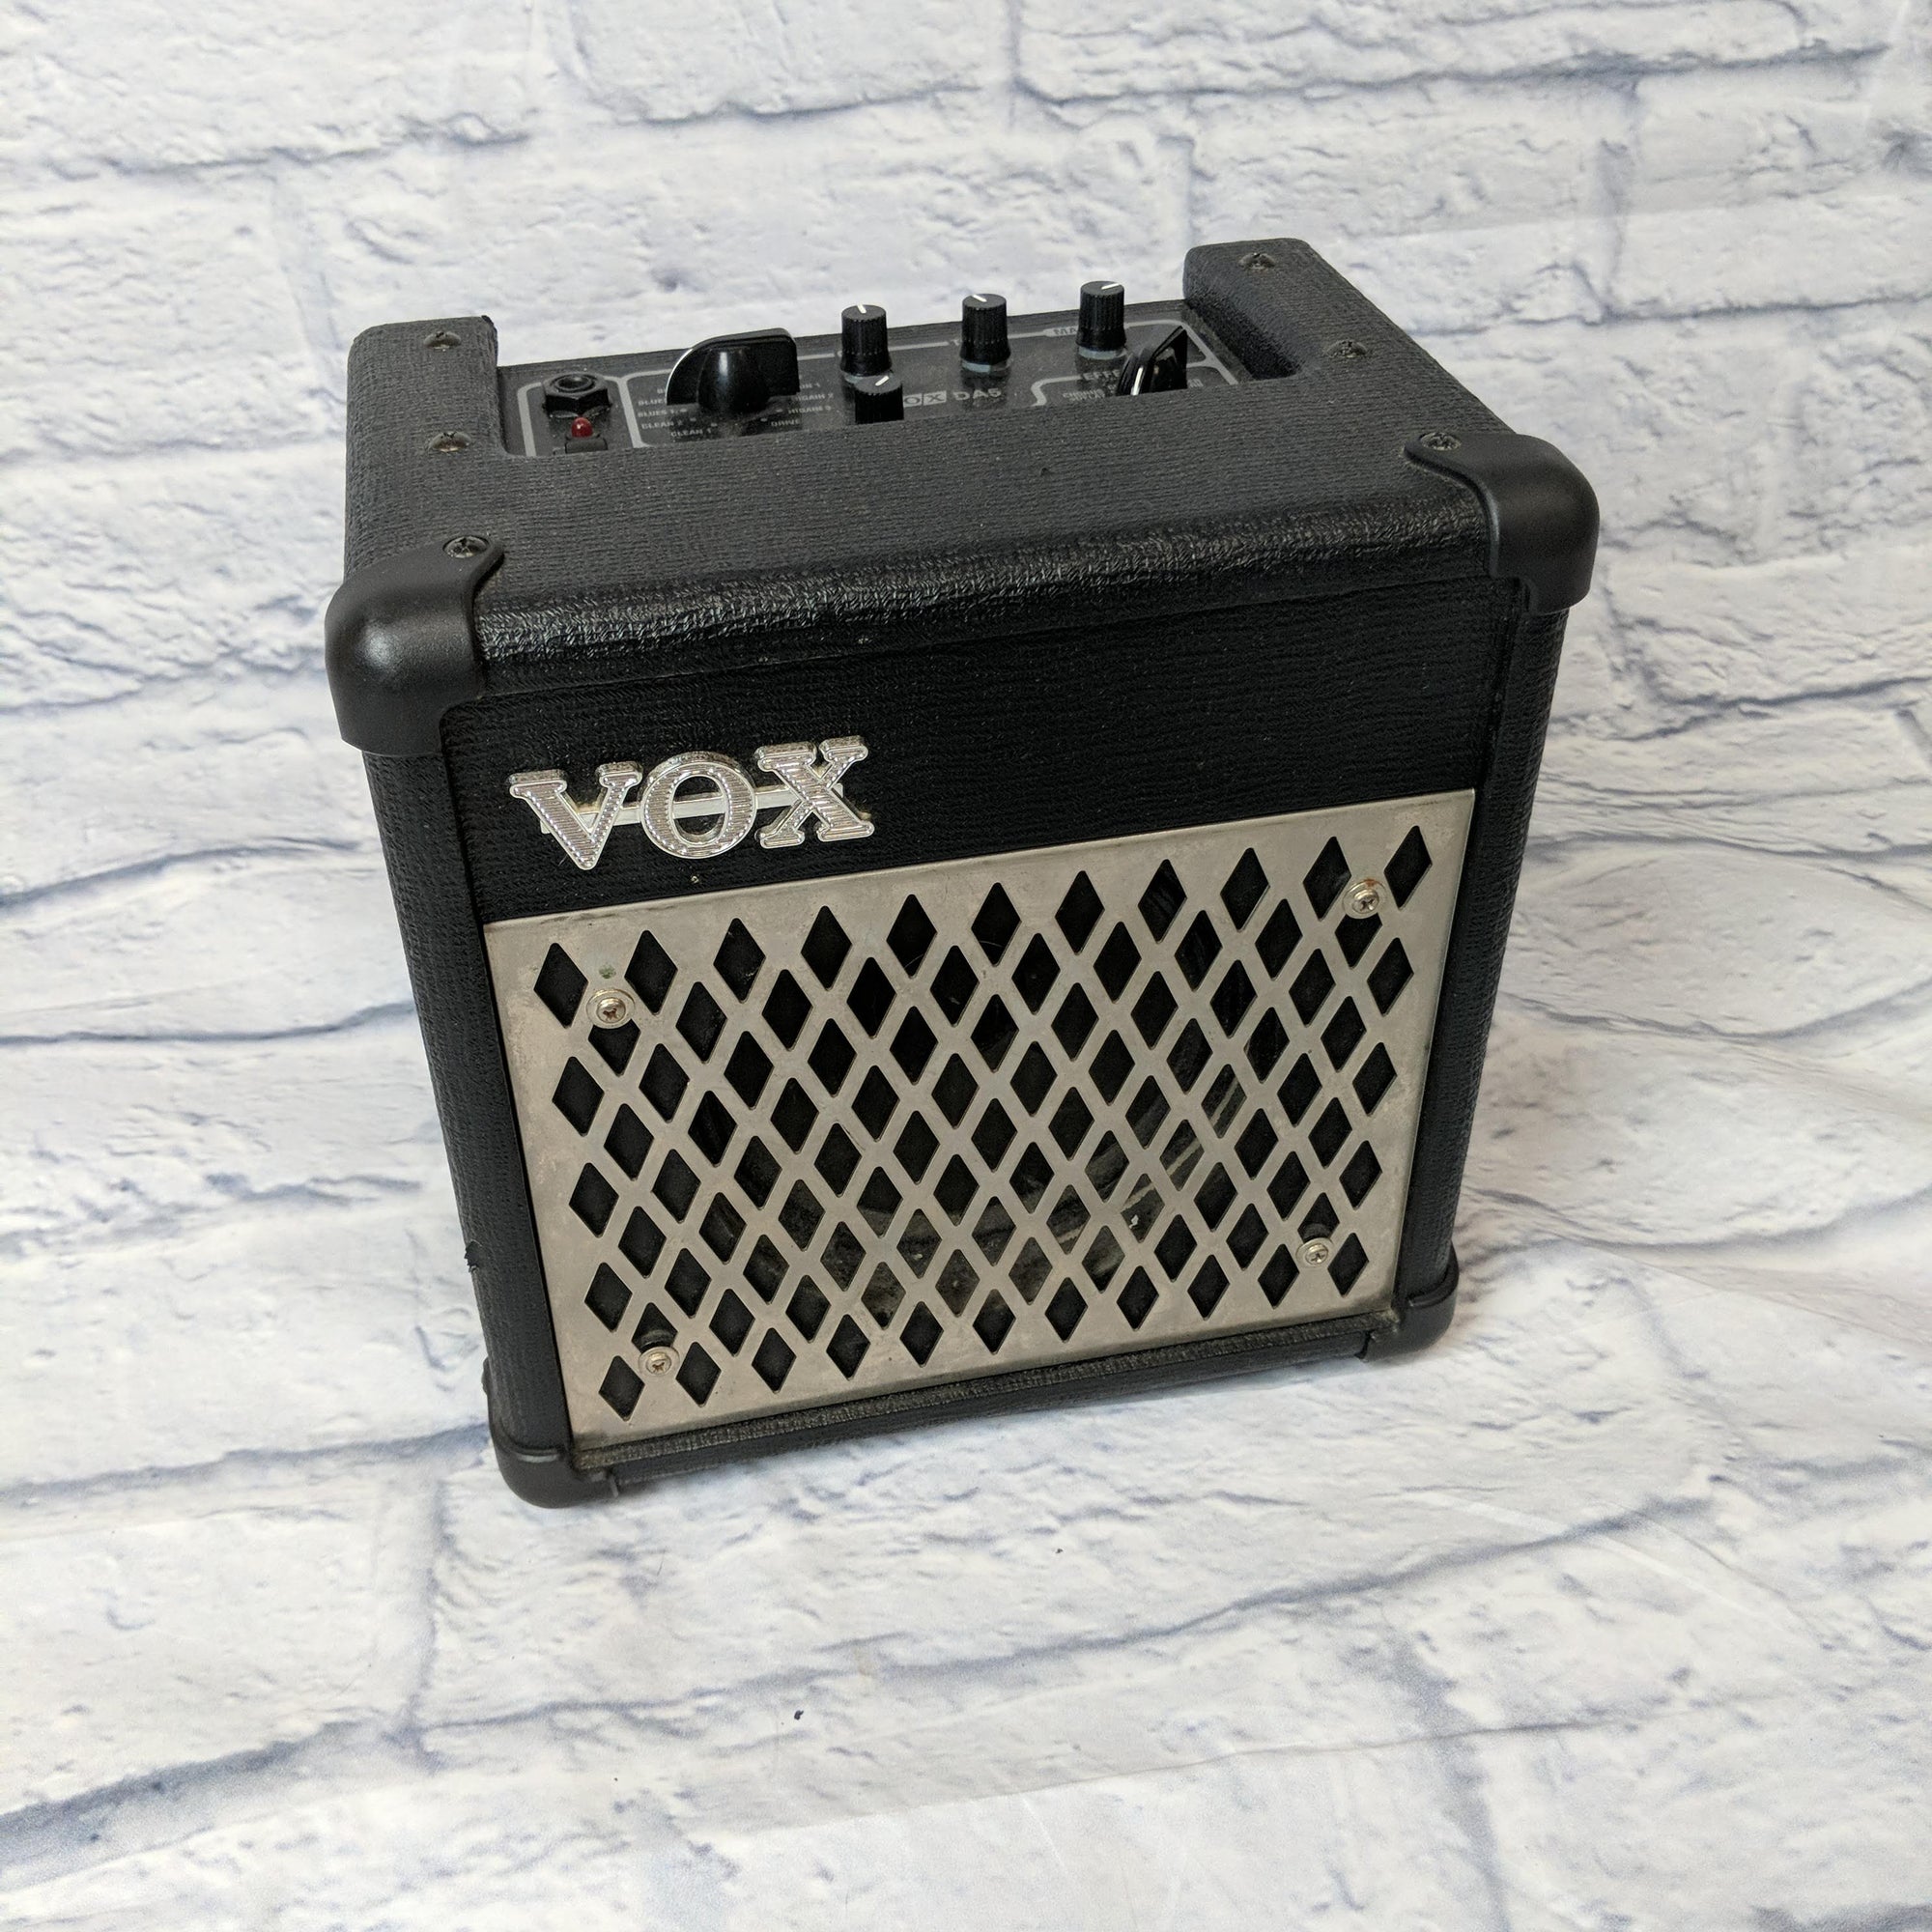 Vox DA5 Battery Powered Practice Combo Amp for Electric Guitar